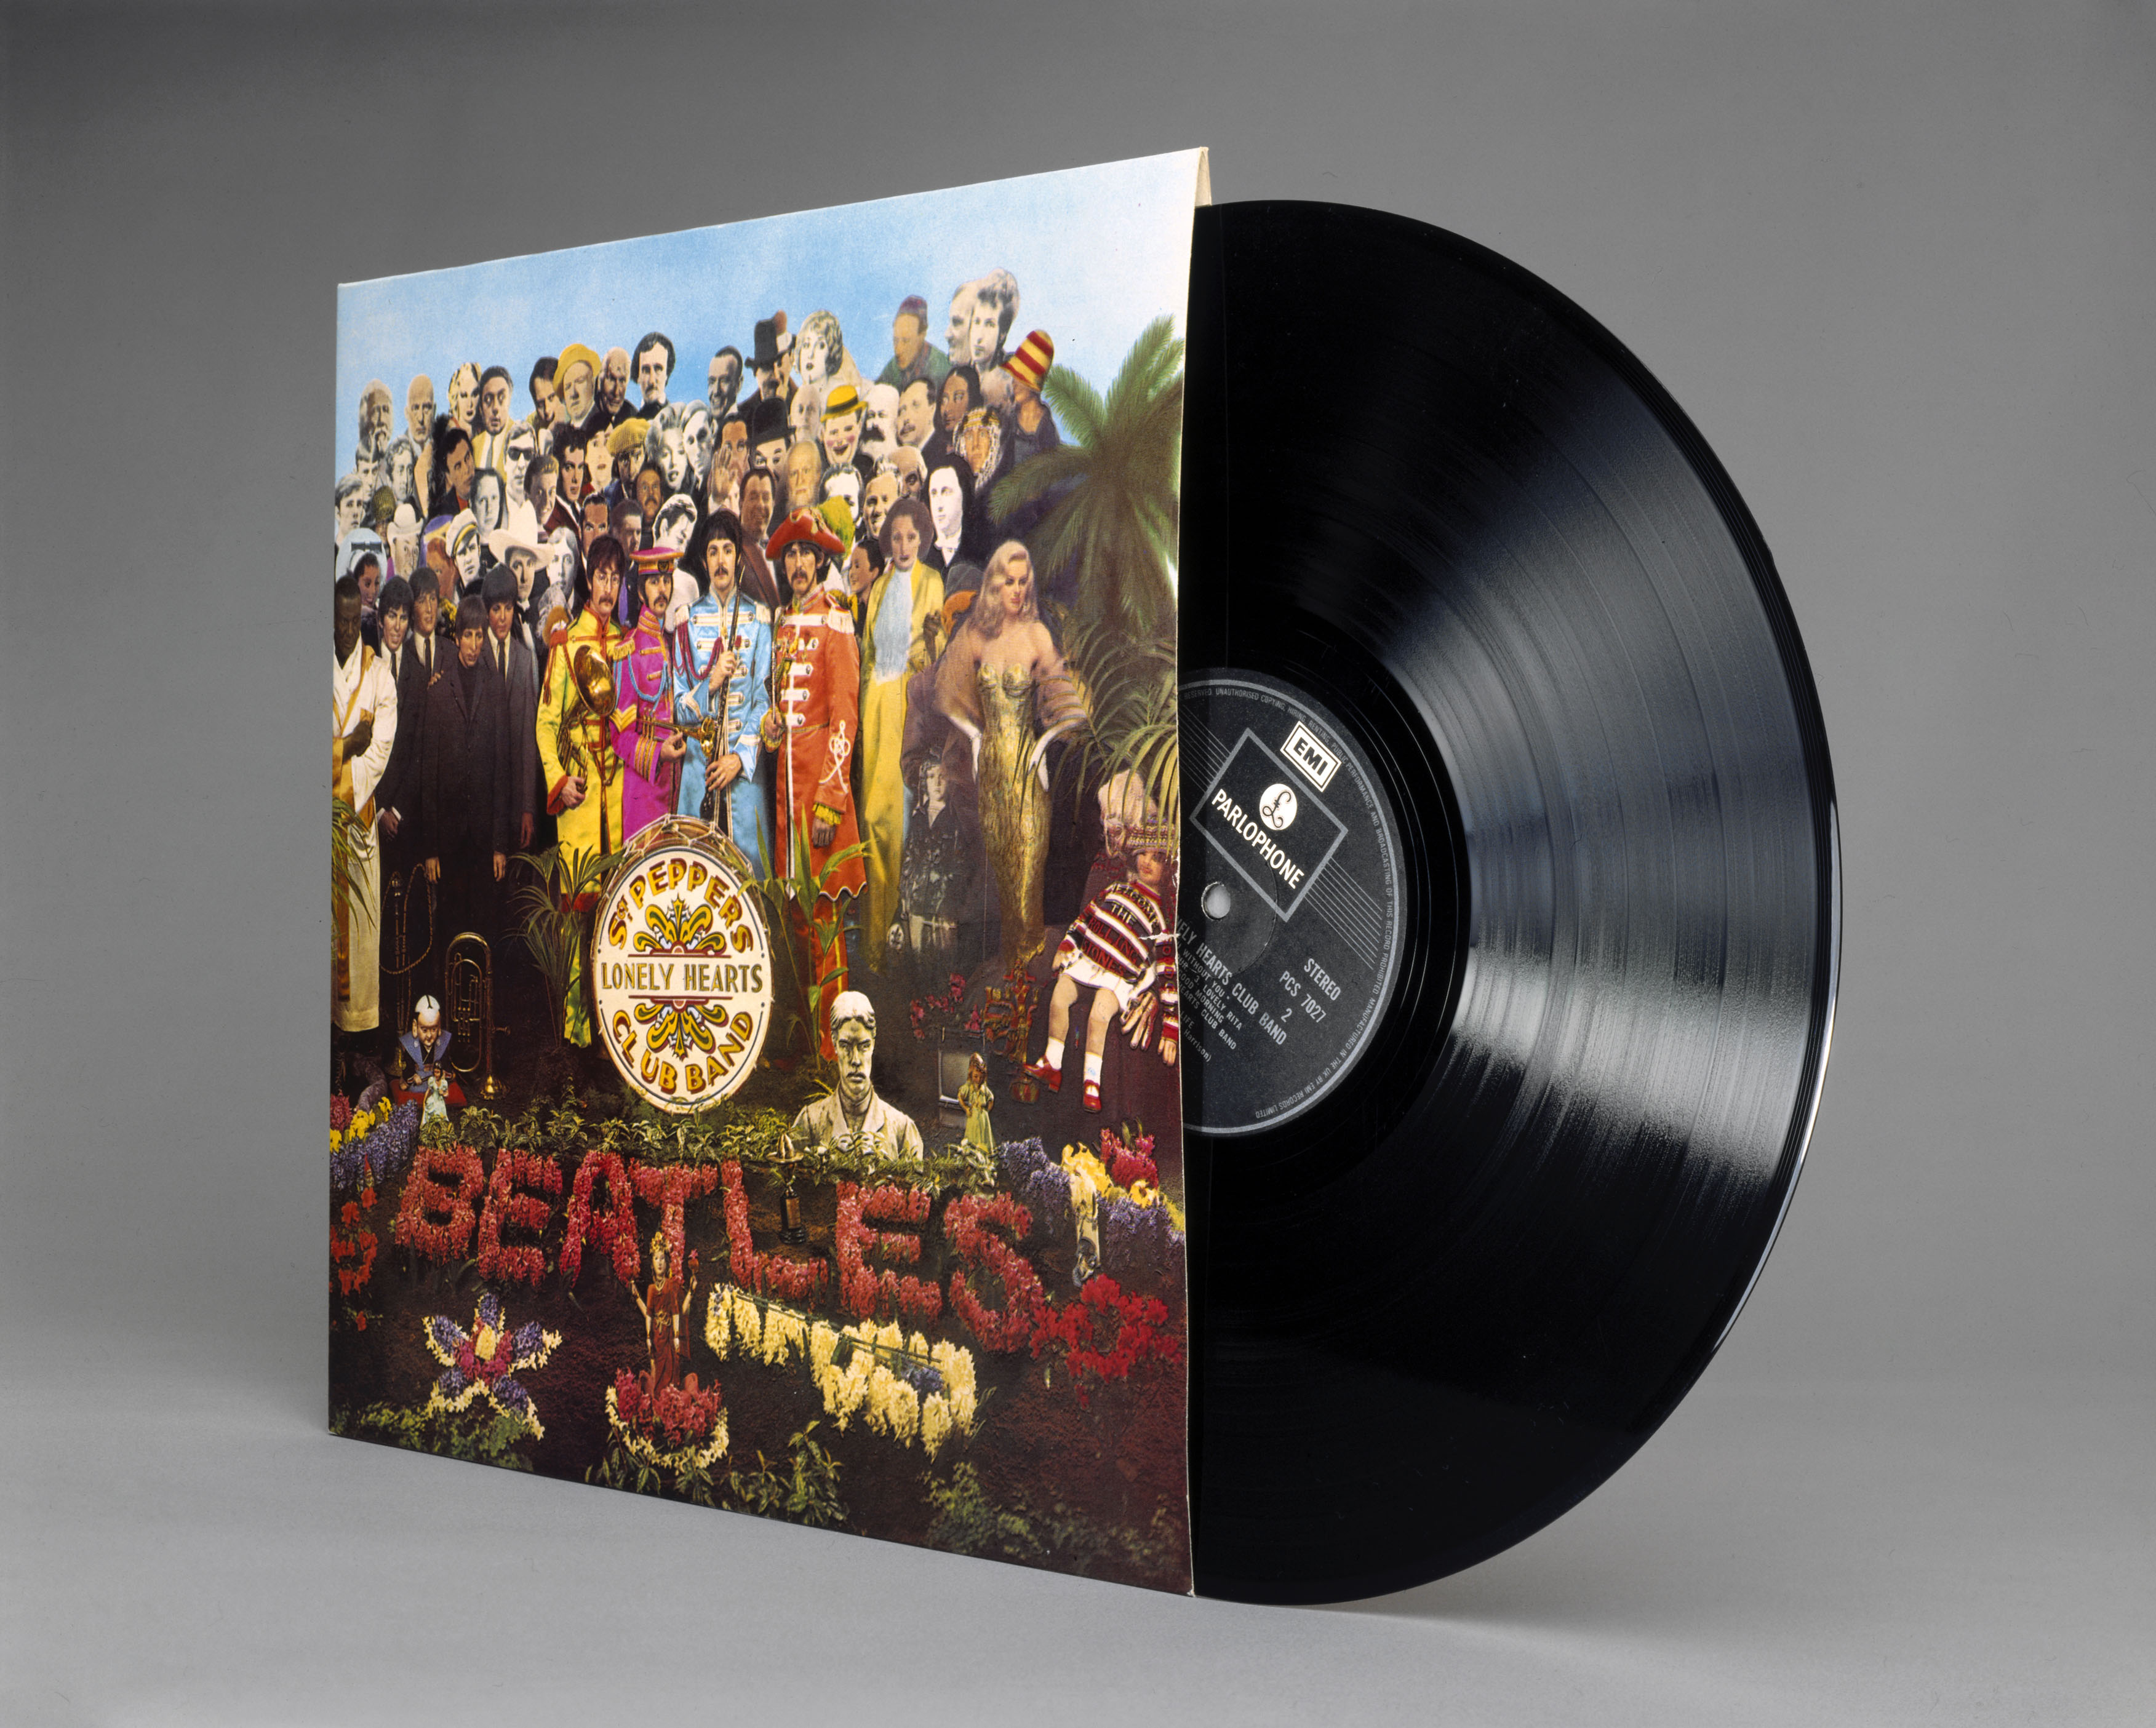 A Sgt. Pepper's Lonely Hearts Club Band vinyl